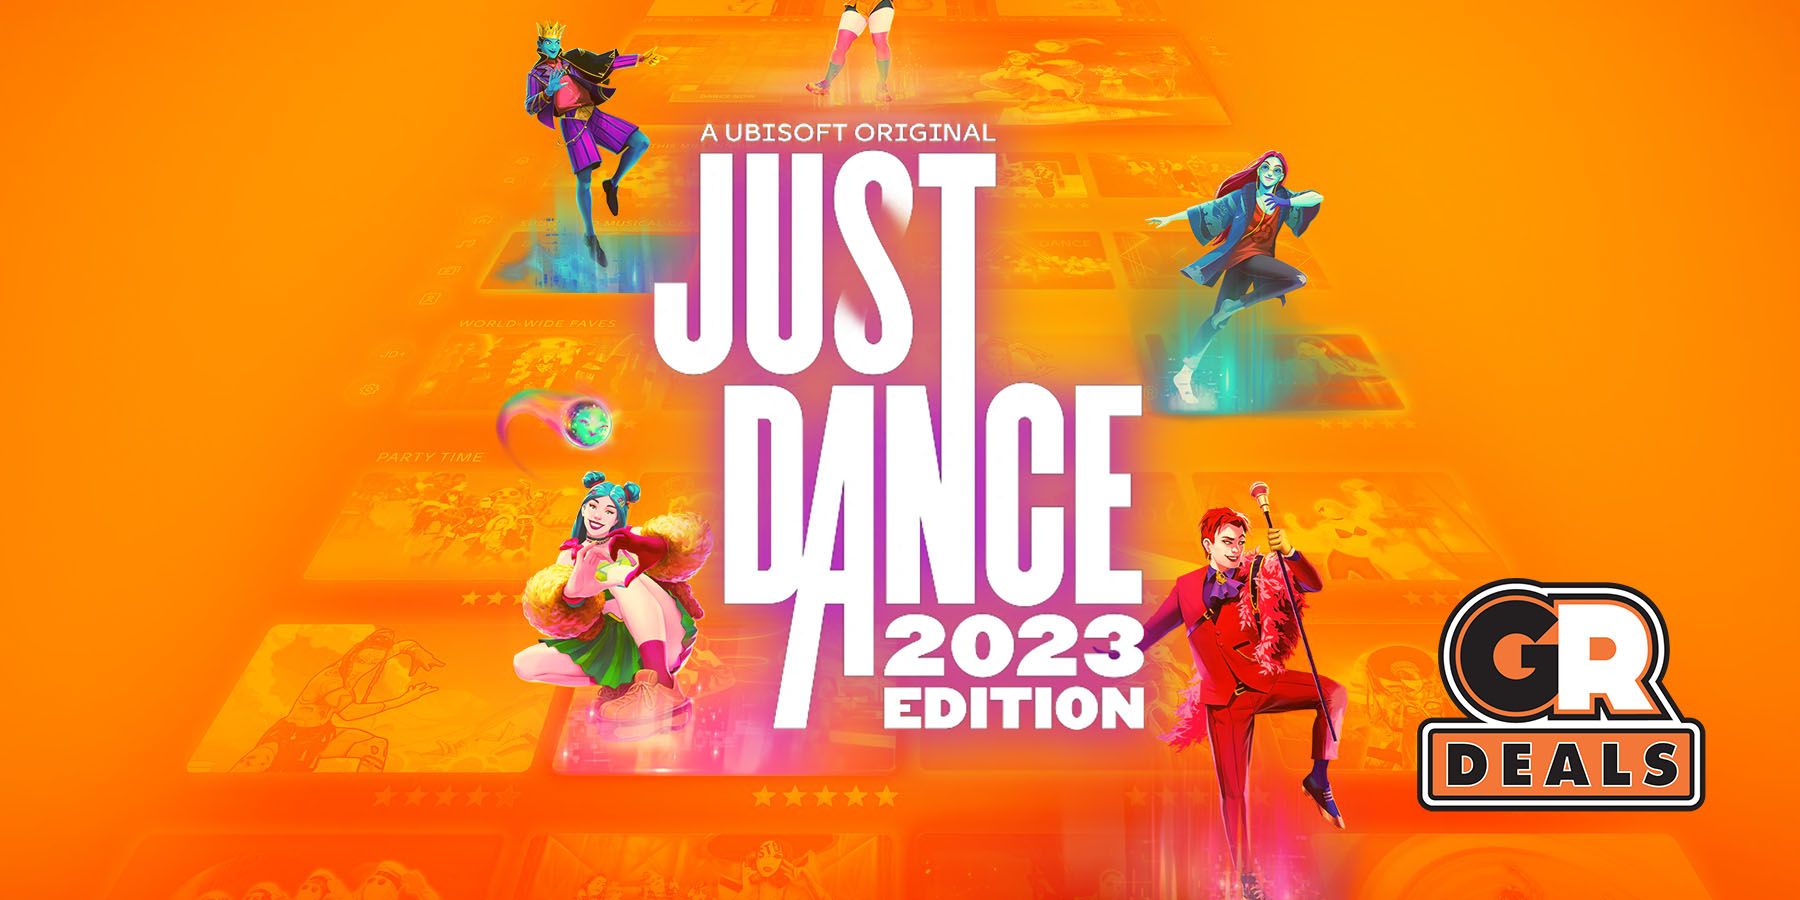 Get Rolling with a $40 Discount on Just Dance 2023 for PS5